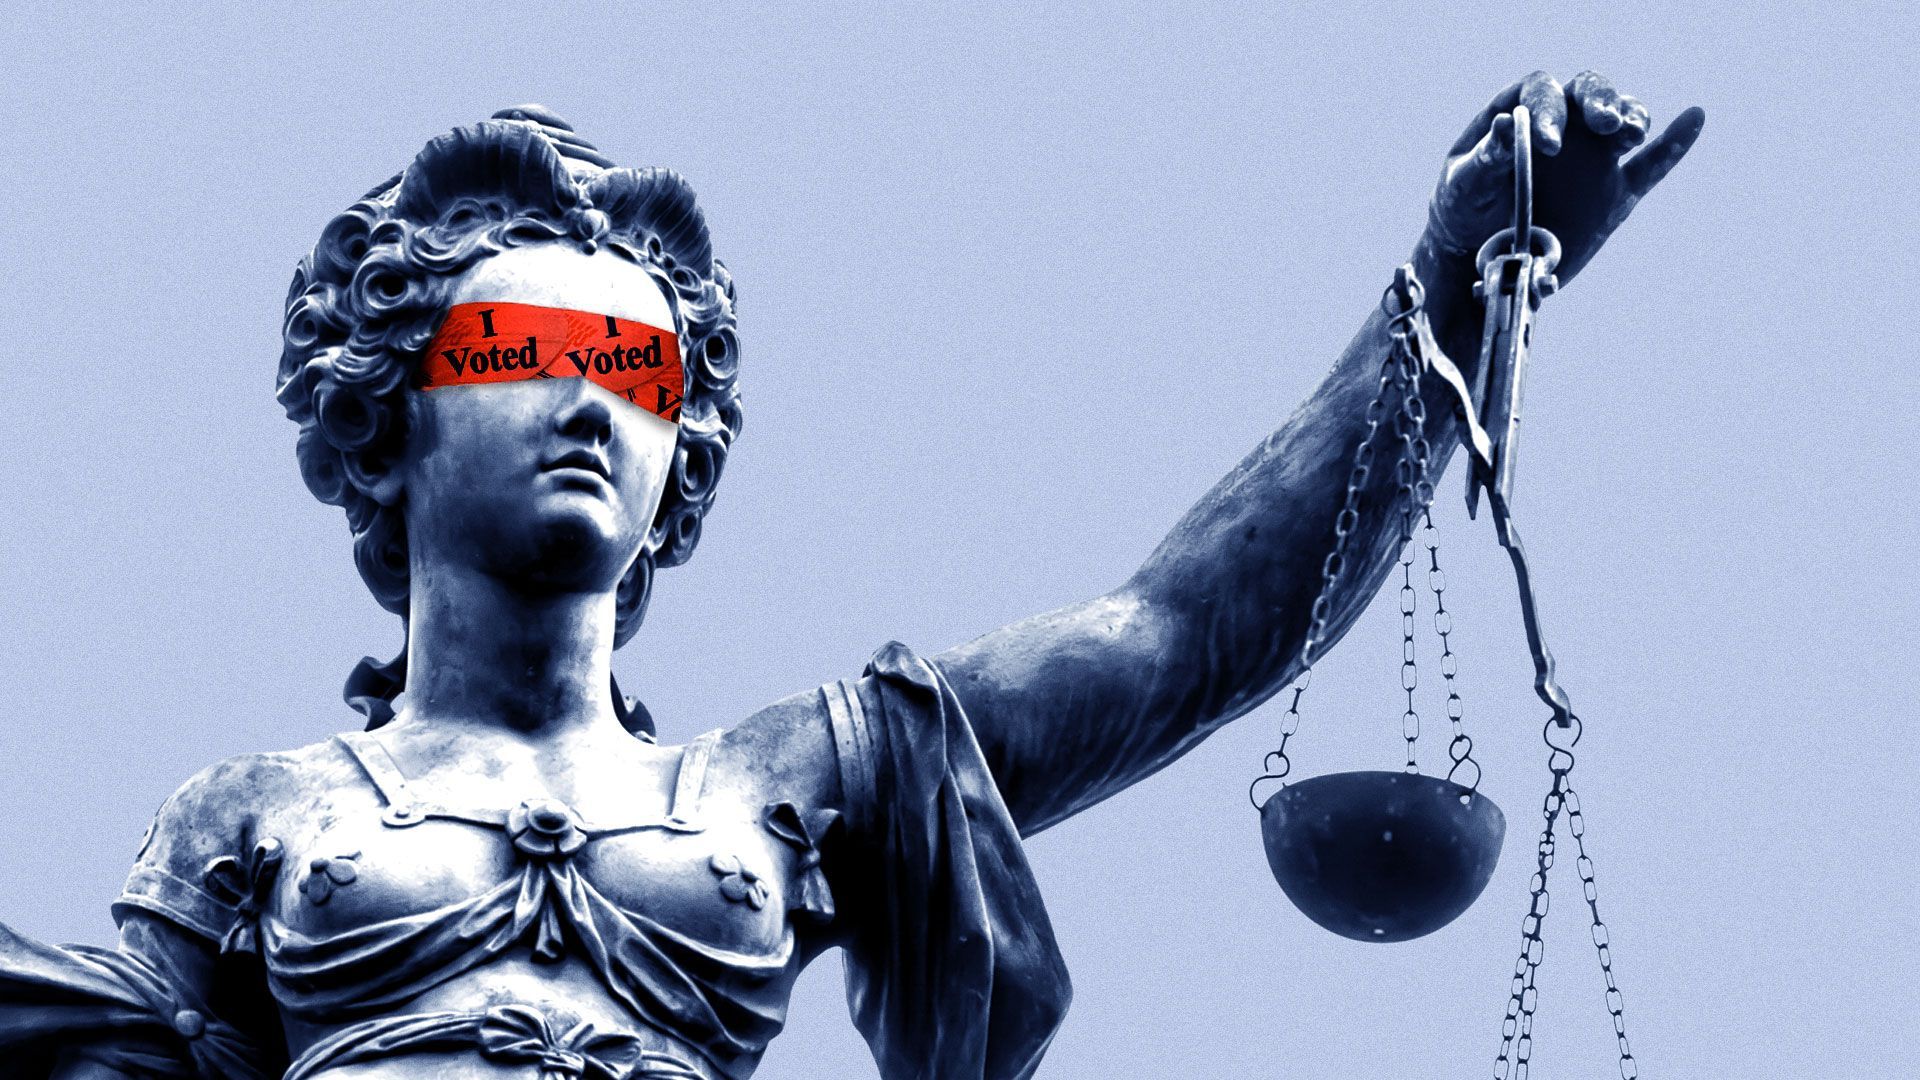 Illustration of lady justice with an “I voted” stickers blindfold over her eyes